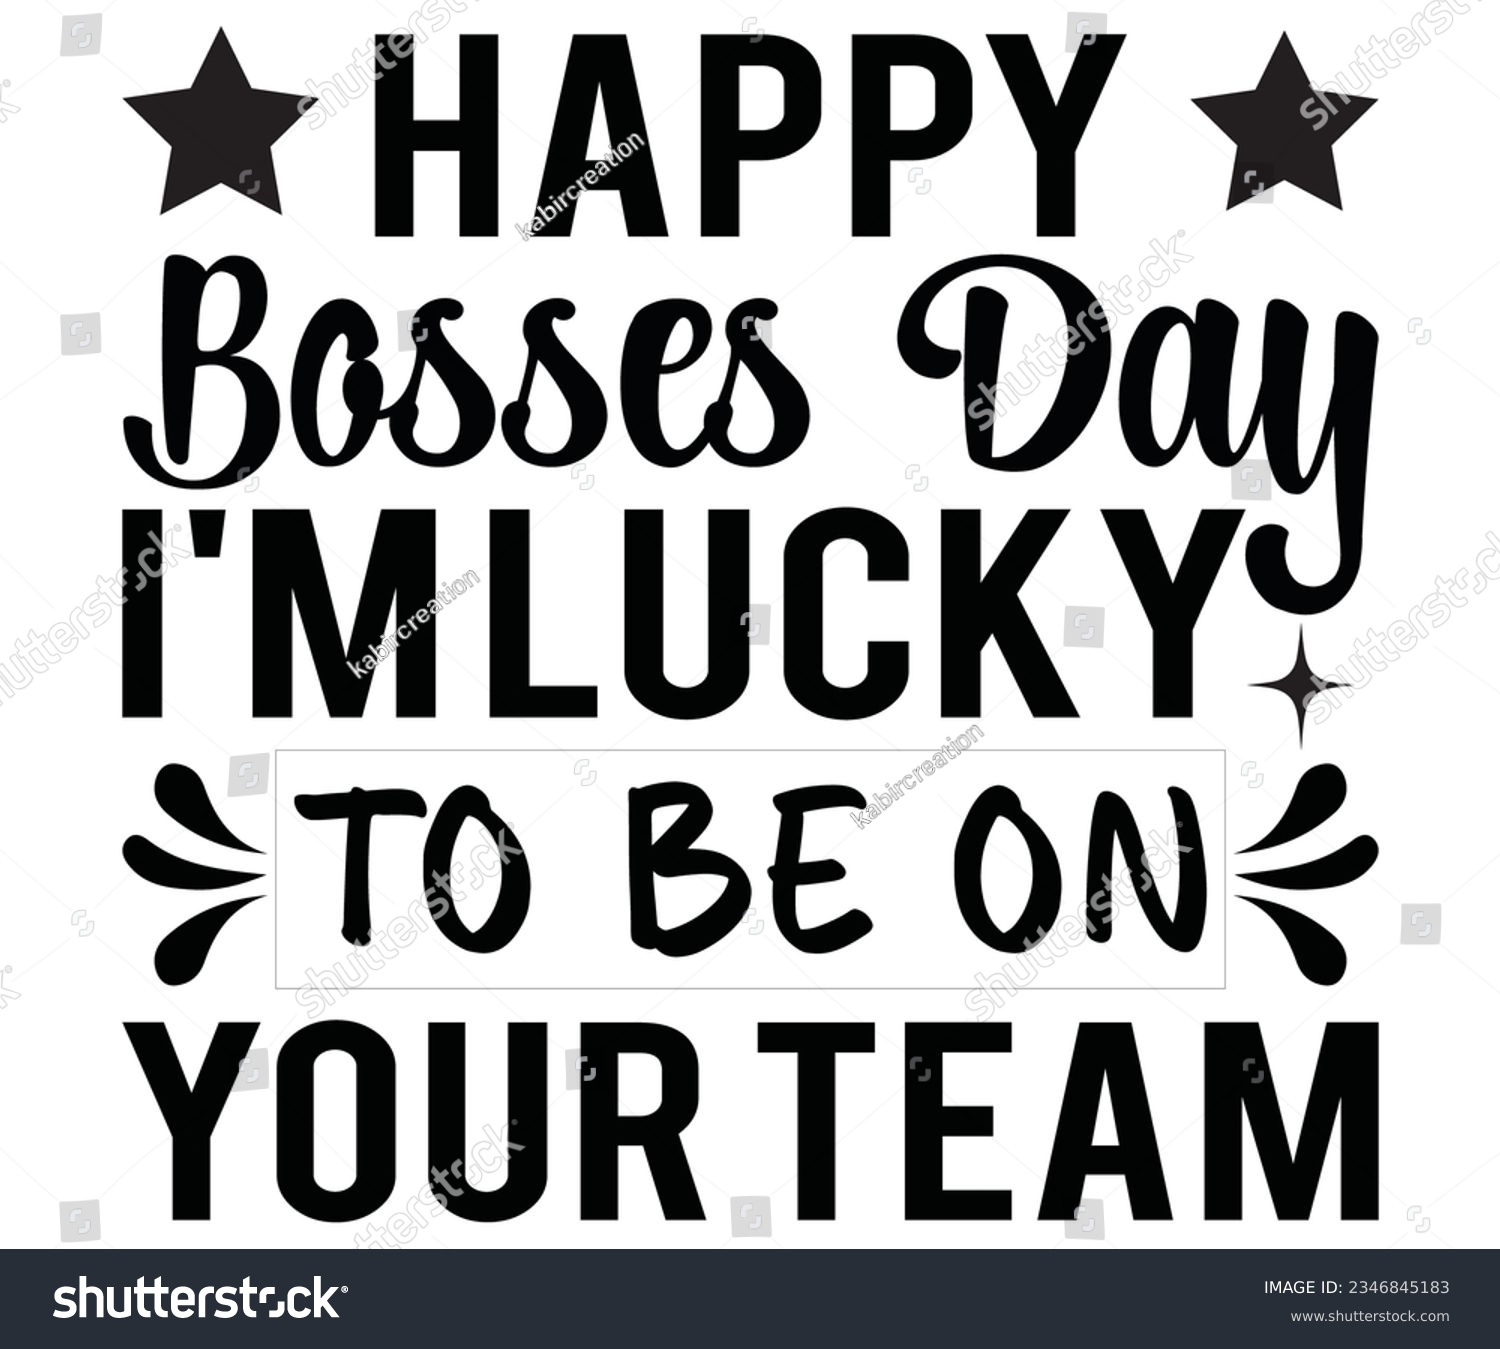 SVG of Happy Bosses Day I'm Lucky to be on your team svg ,Happy svg,  Bosses Day ,Lucky  t shart ,on svg
Happy Bosses Day t shart svg